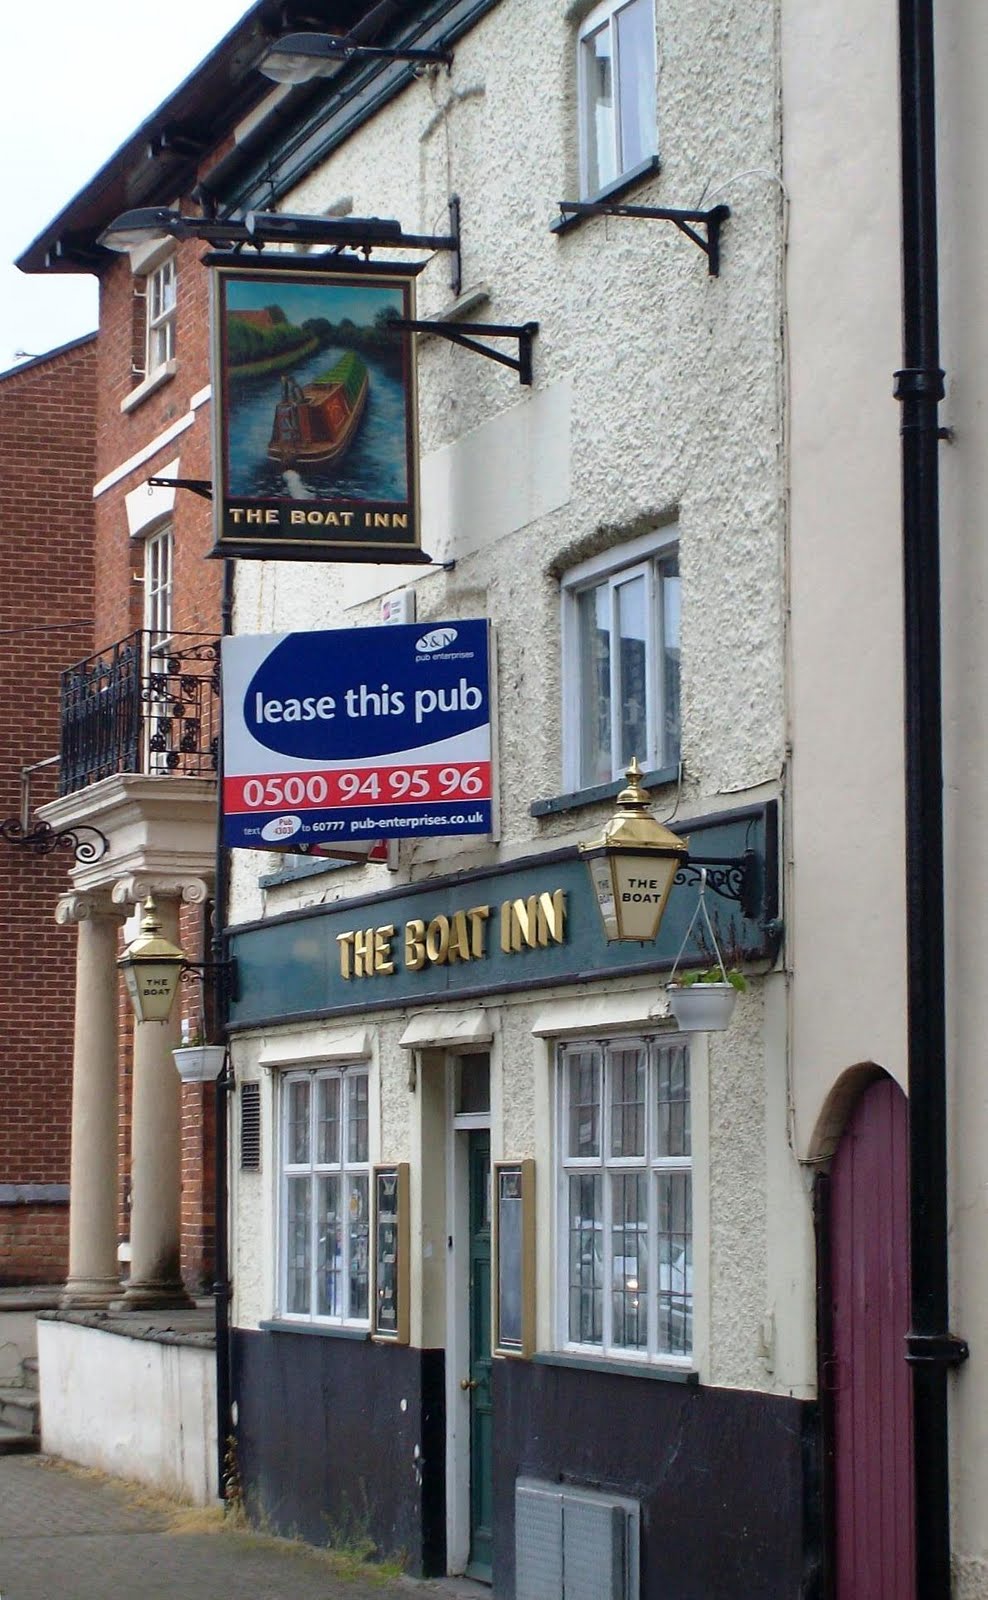 liberal england: the boat inn and the melton mowbray